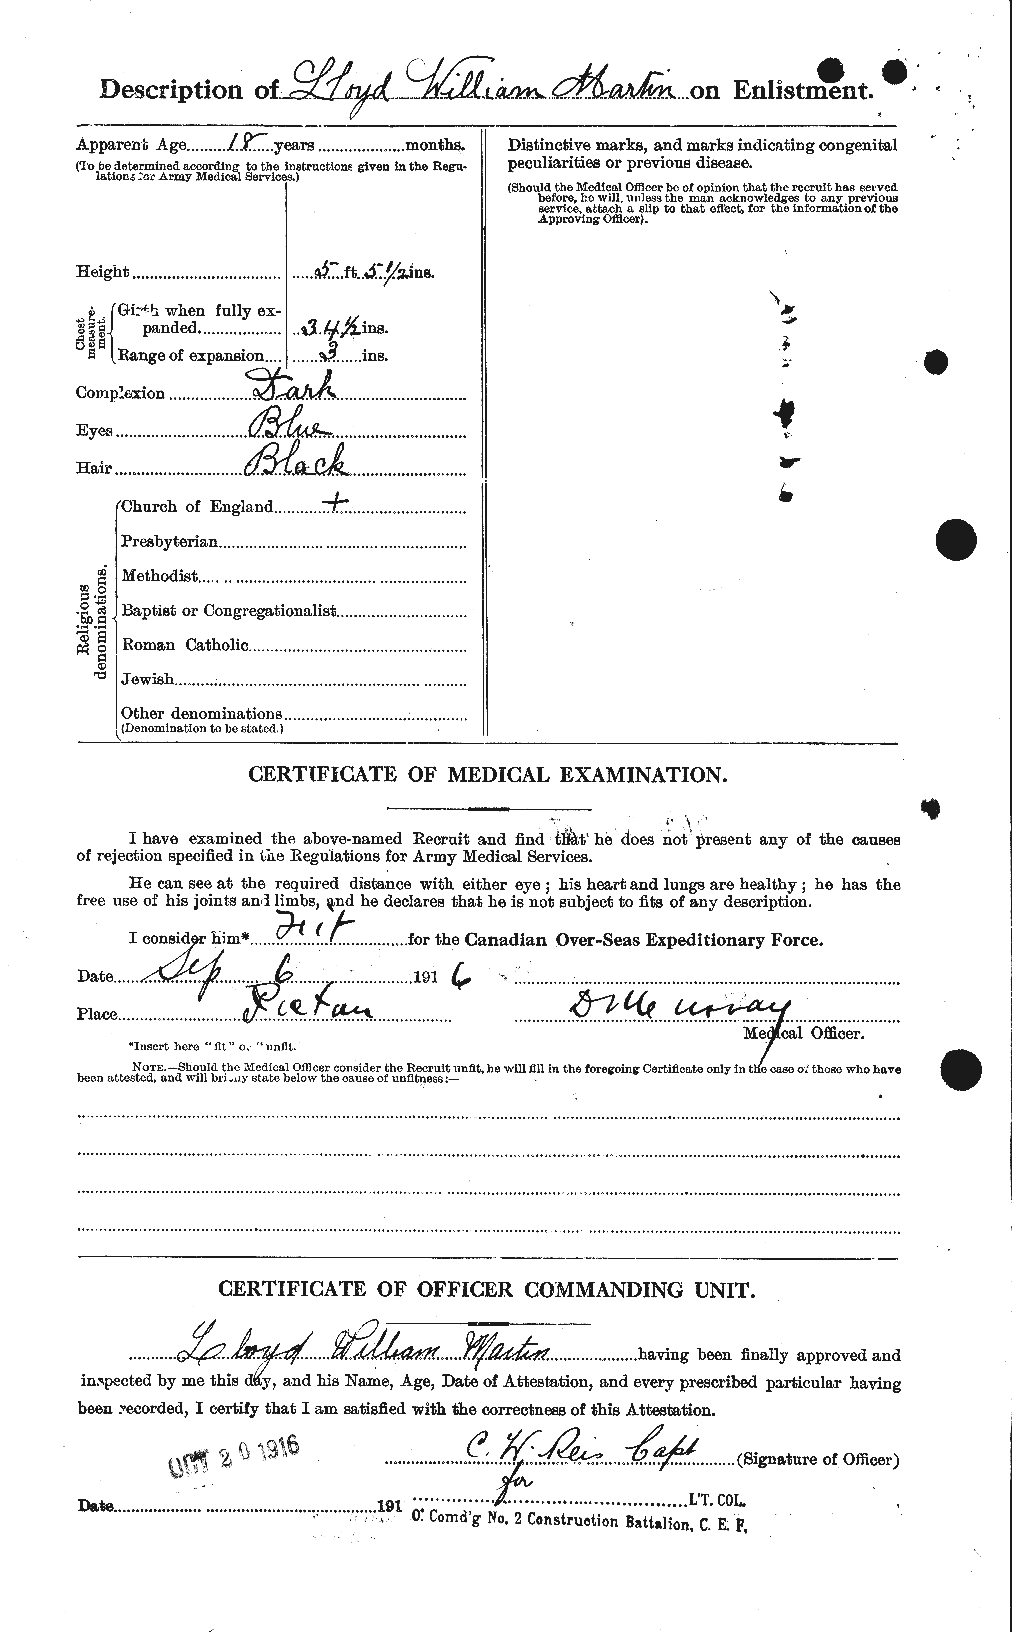 Personnel Records of the First World War - CEF 481137b